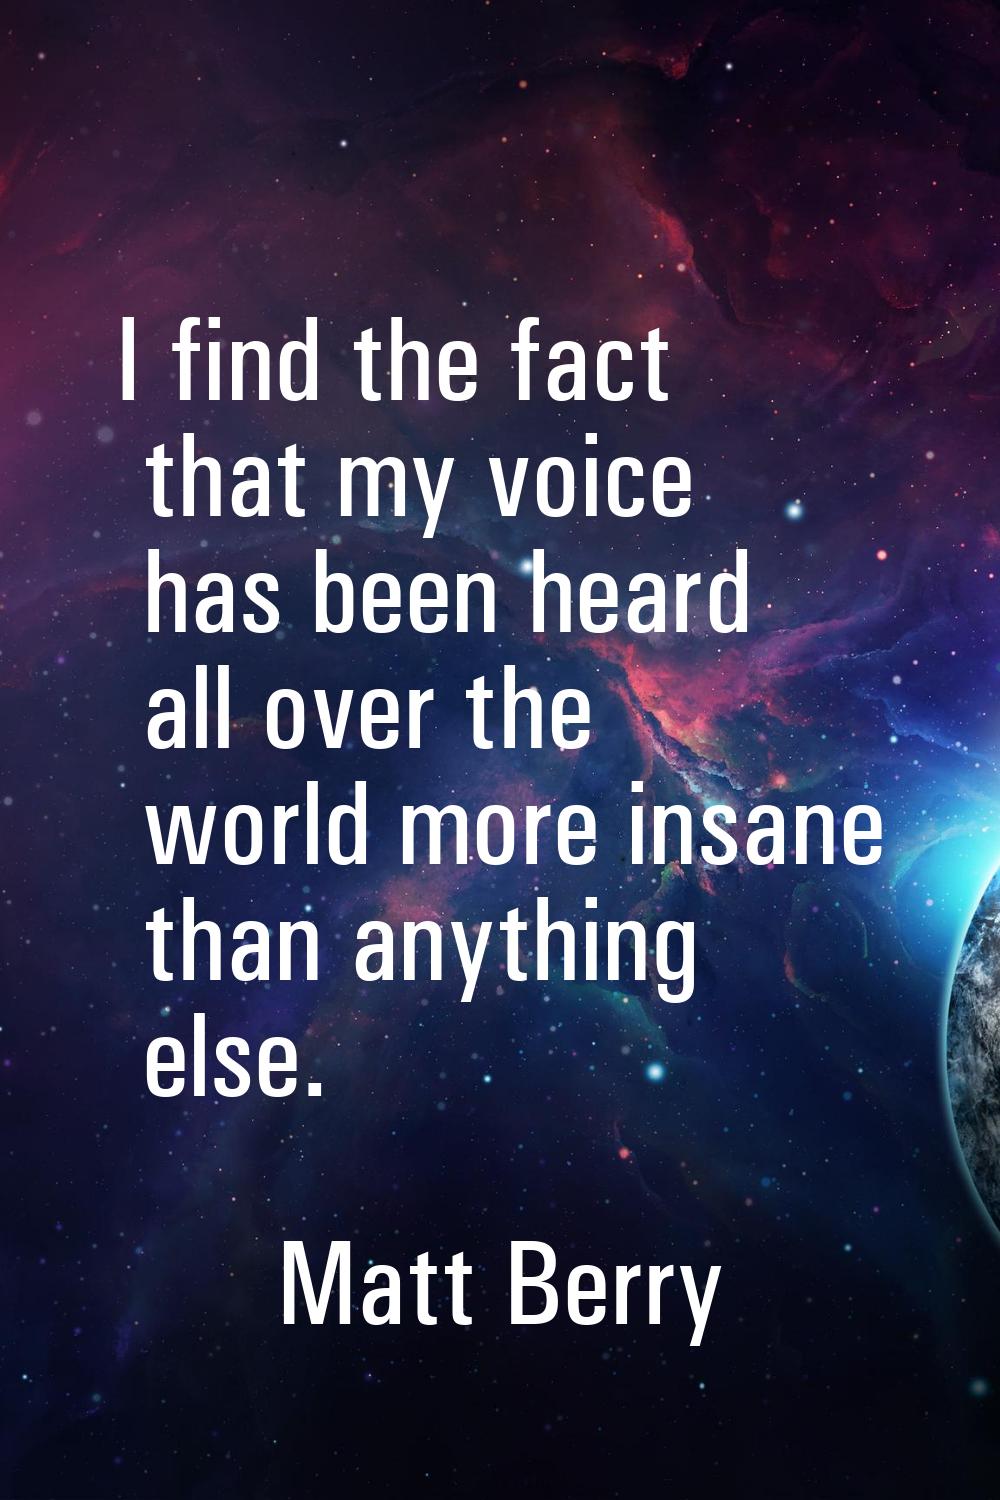 I find the fact that my voice has been heard all over the world more insane than anything else.